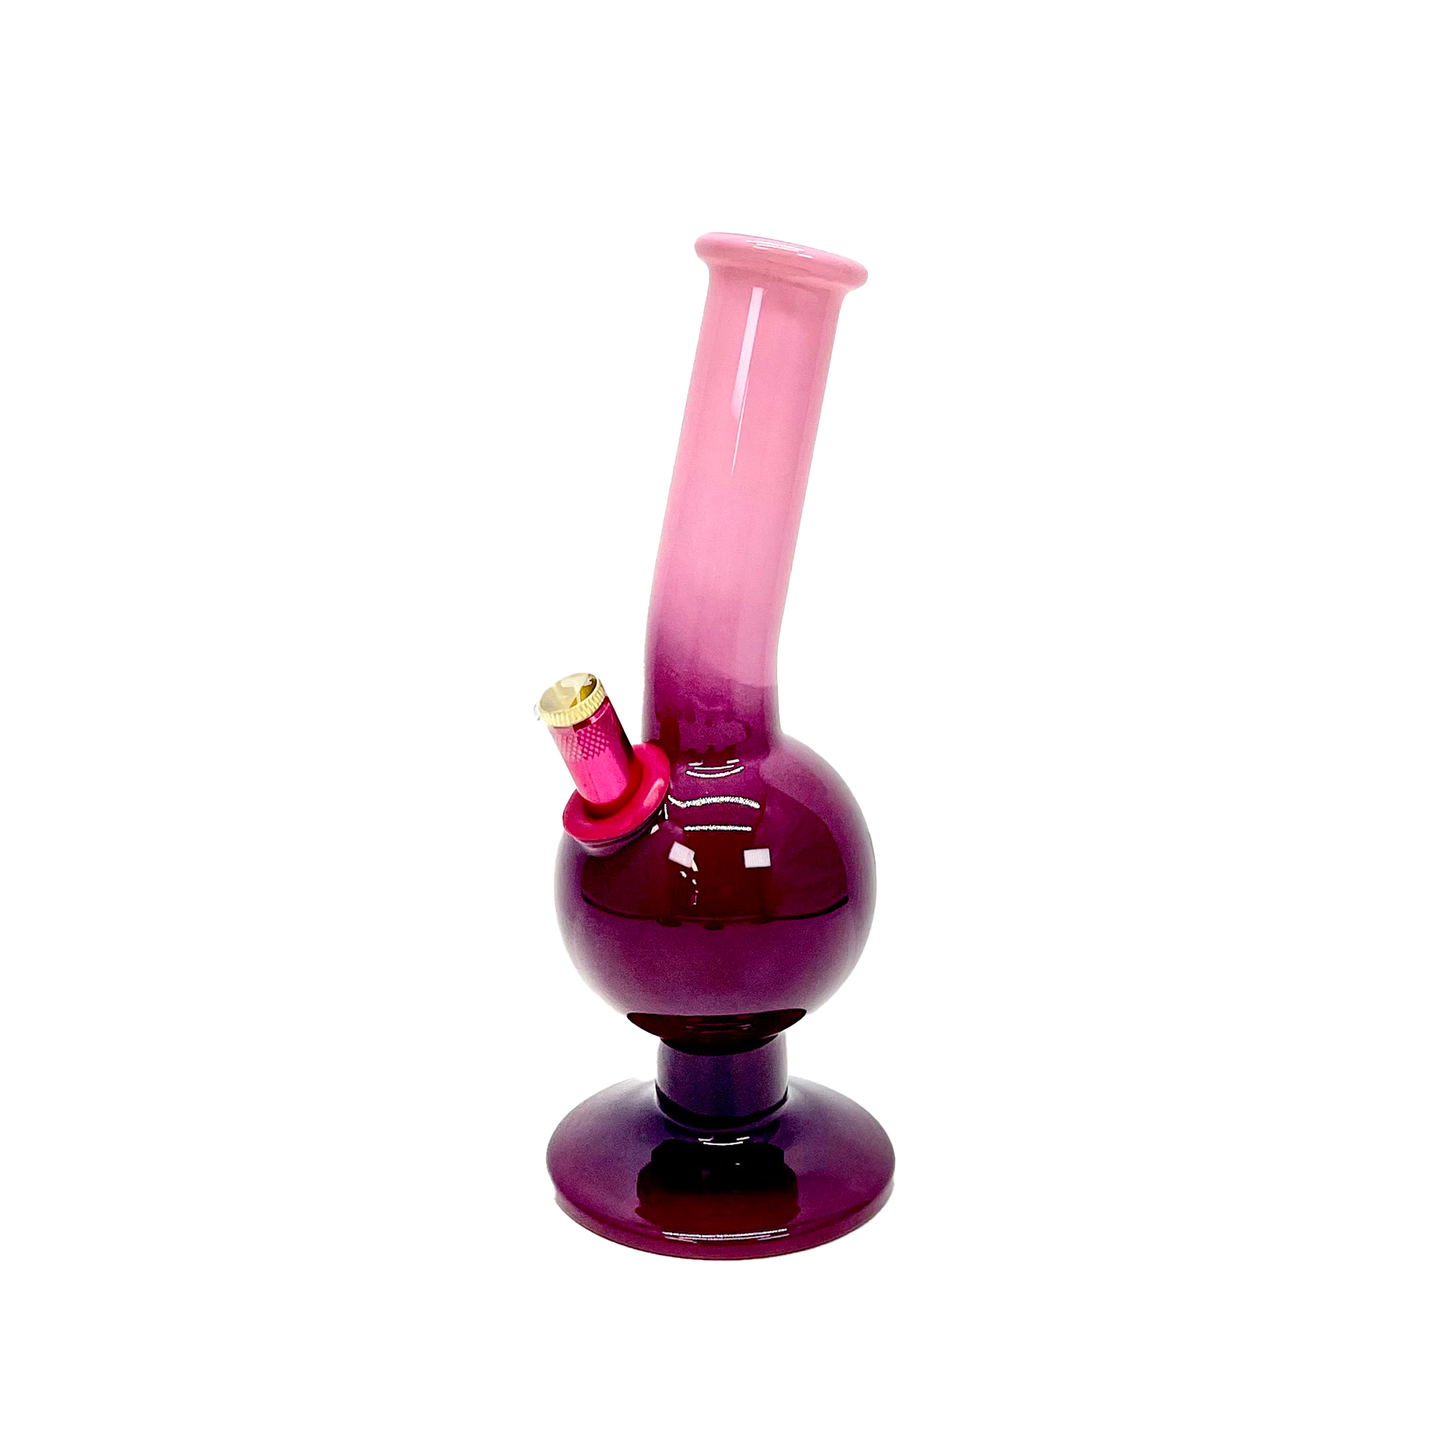 Medium Bent  Bubble Bonza Bong Pink color  23cm (Special Edition only 1 in stock)